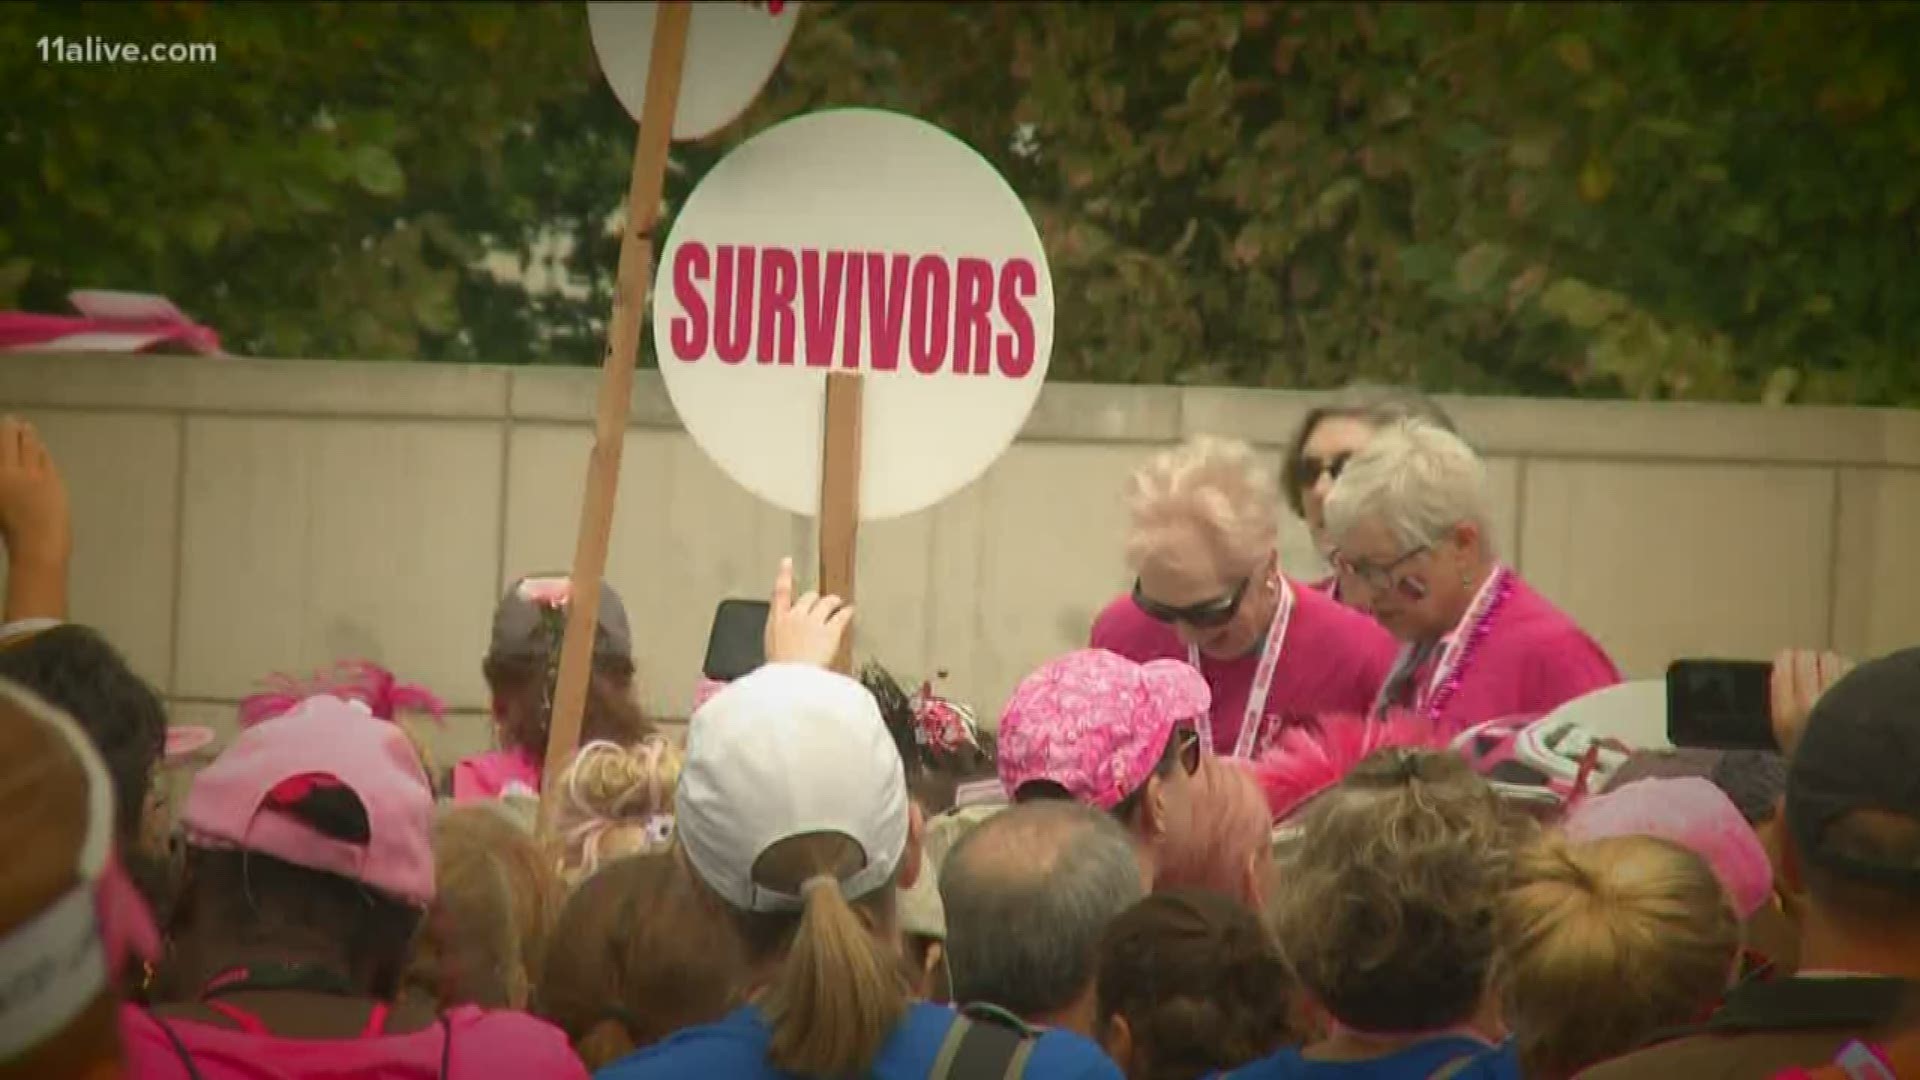 Walkers raised more than $1 million over the weekend. It's the event's 17th year.